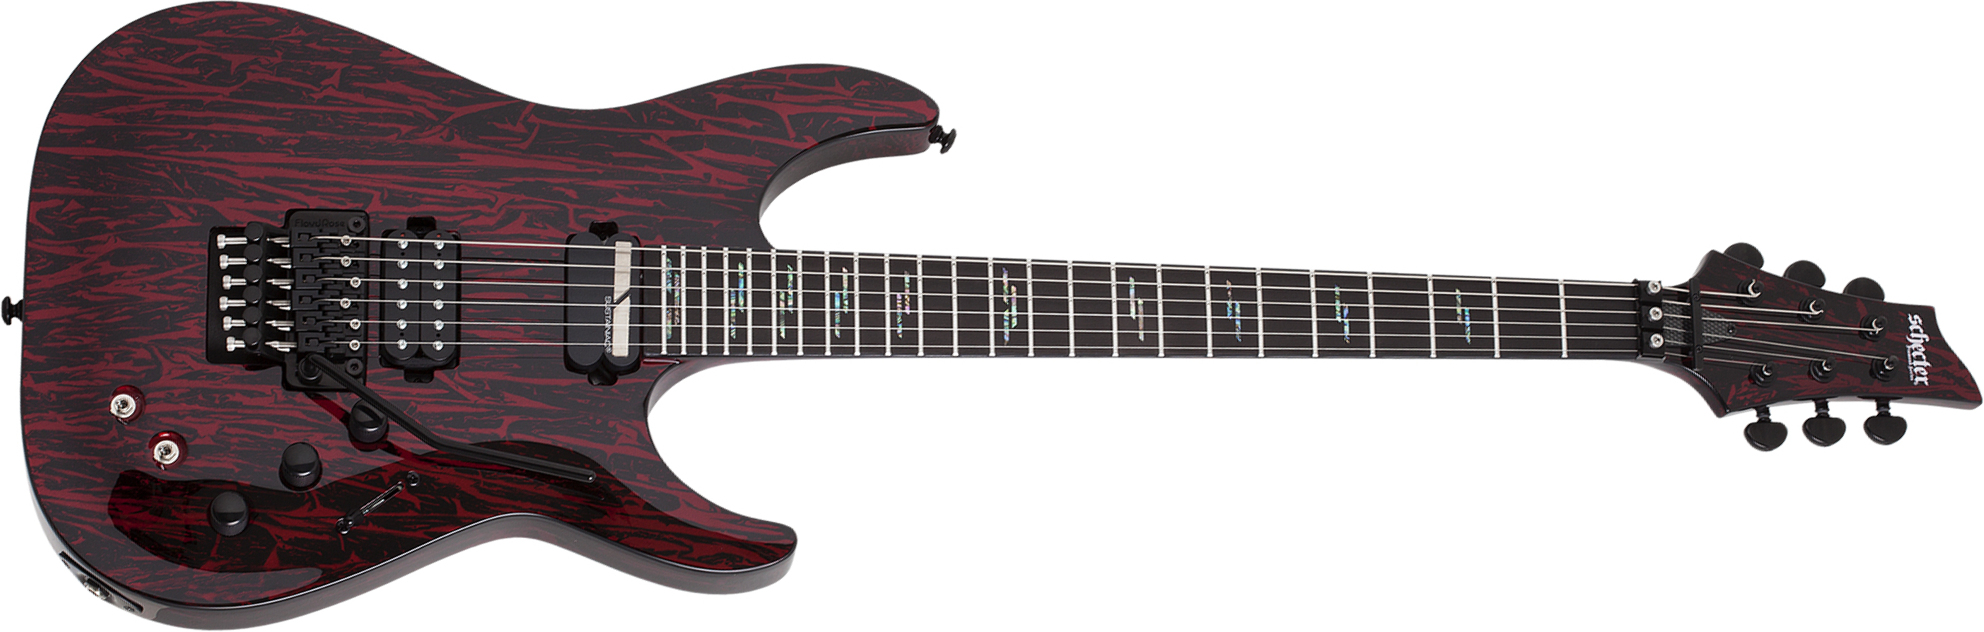 Schecter C-1 Fr  S Silver Mountain 2h Sustainiac Ht Eb - Blood Moon - Str shape electric guitar - Main picture